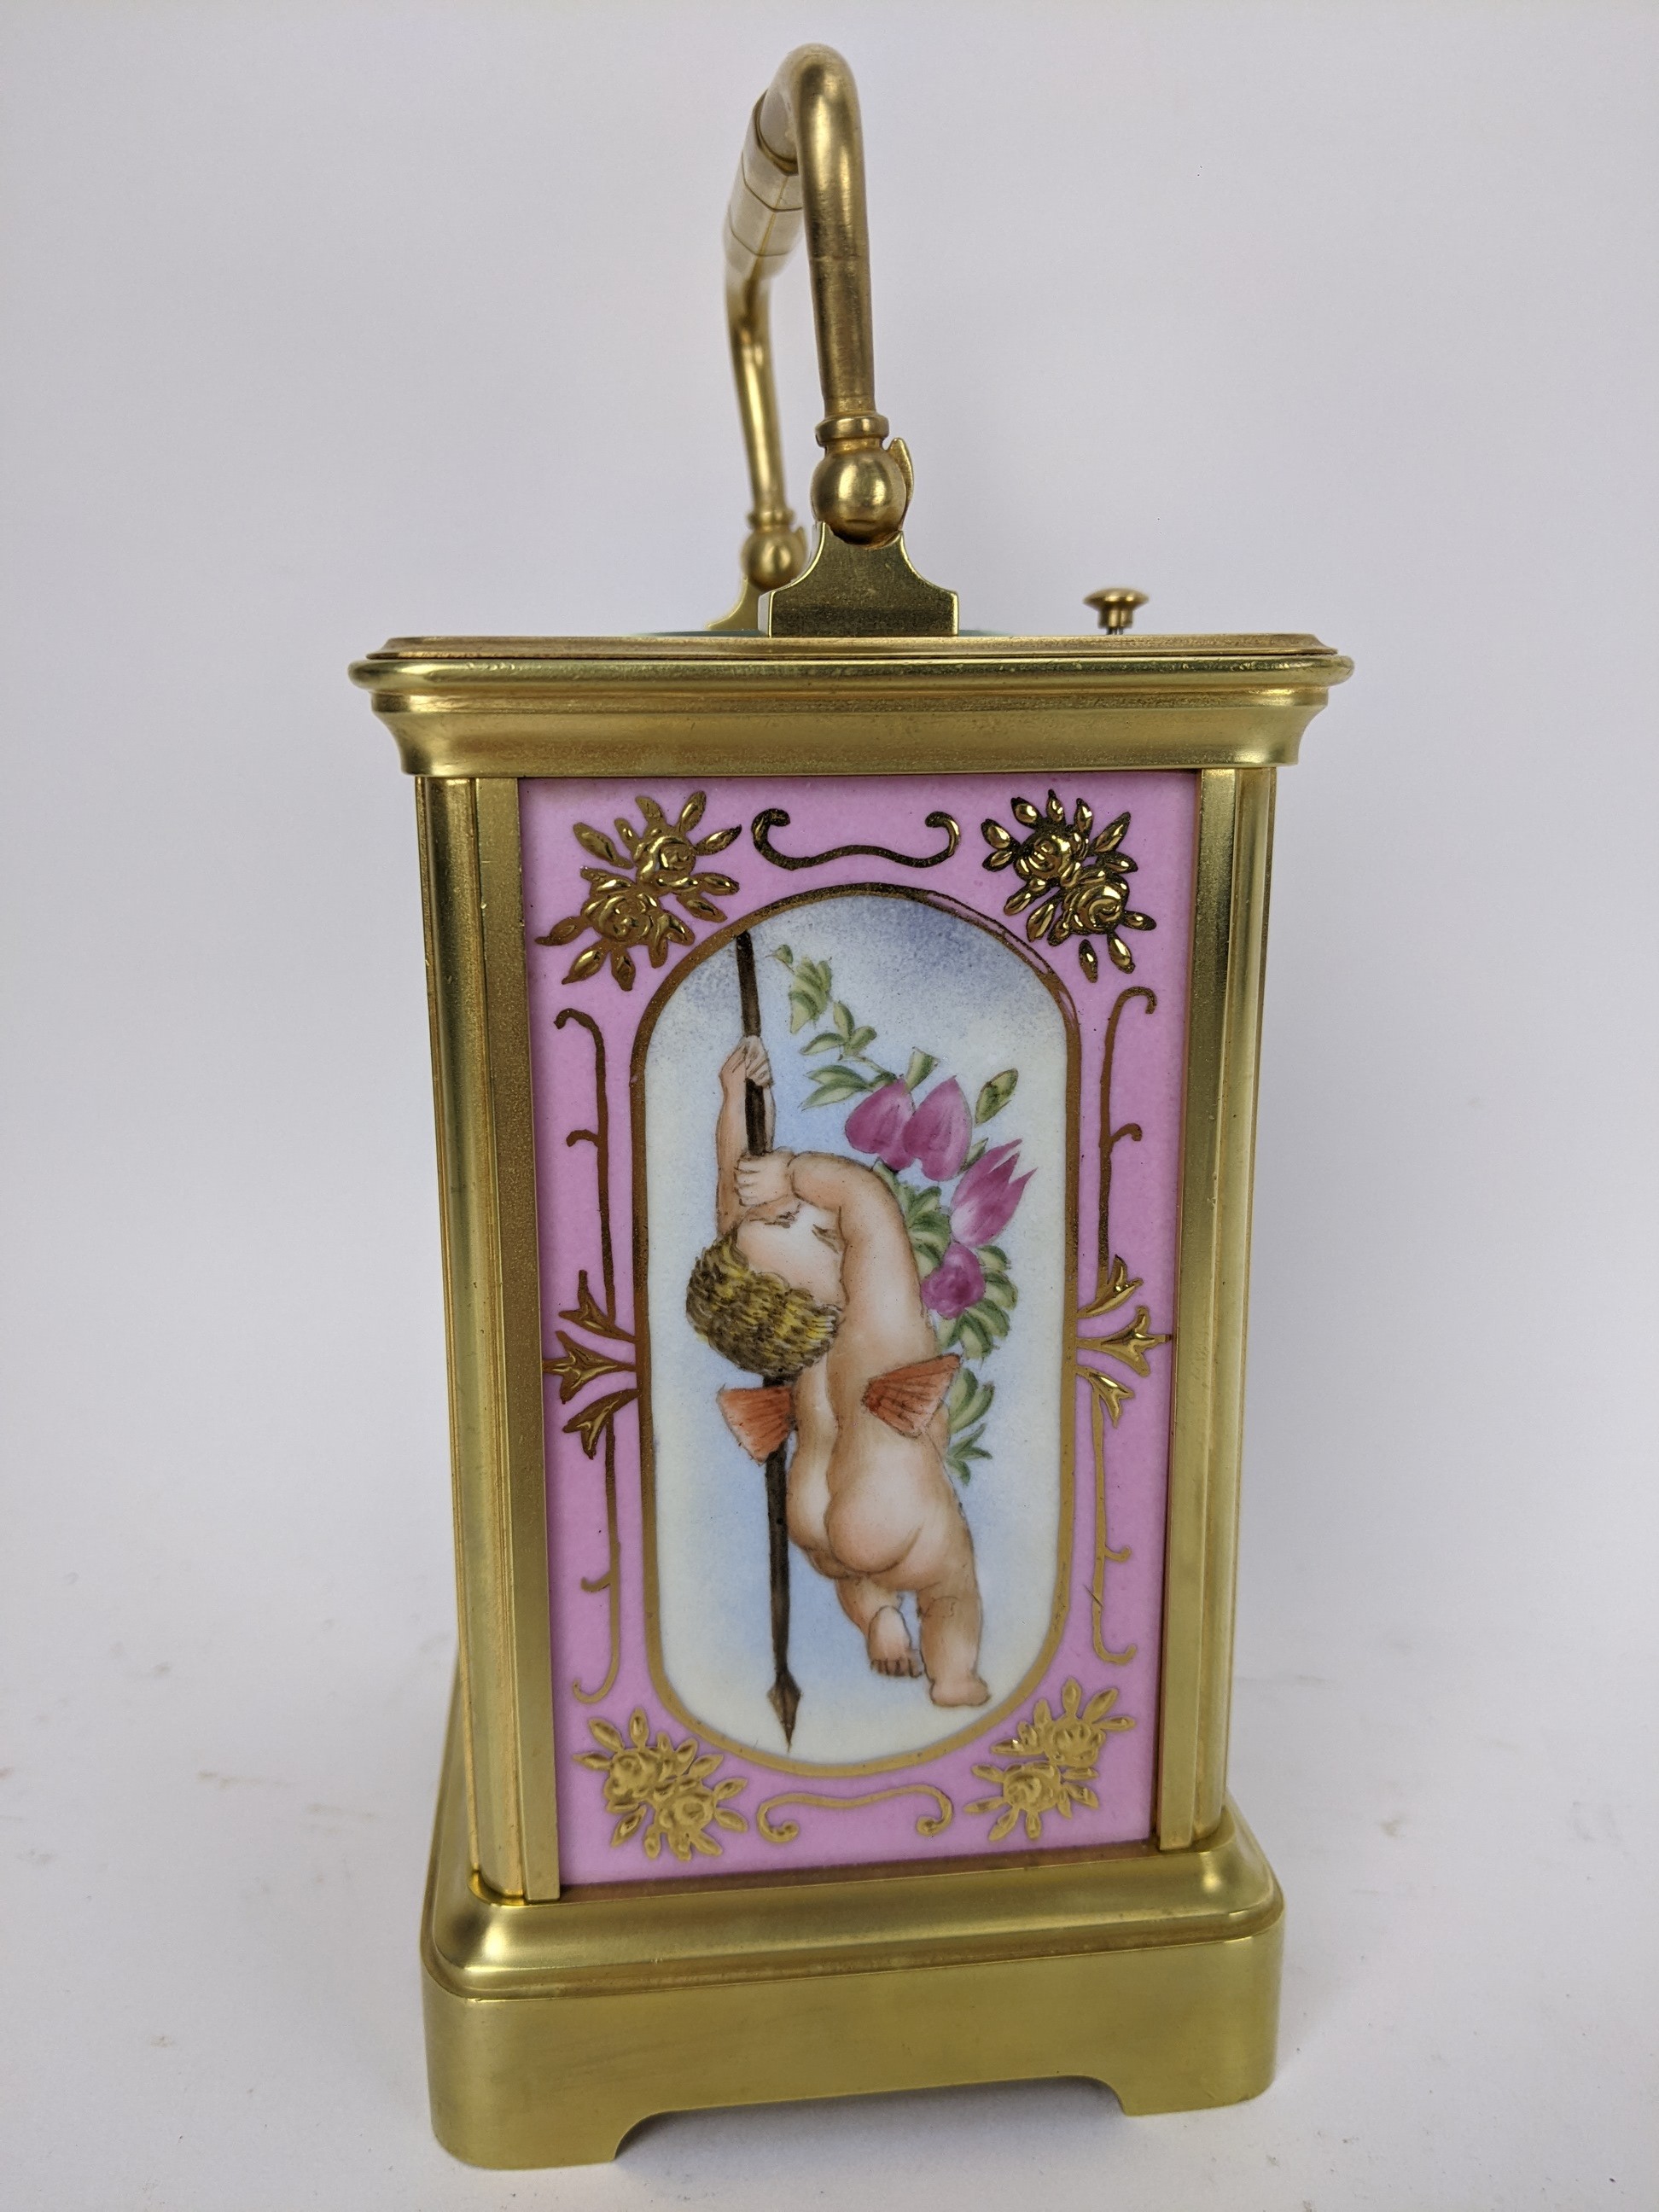 An early 20th century repeater carriage clock, having Sevres style porcelain panels decorated with - Image 3 of 6